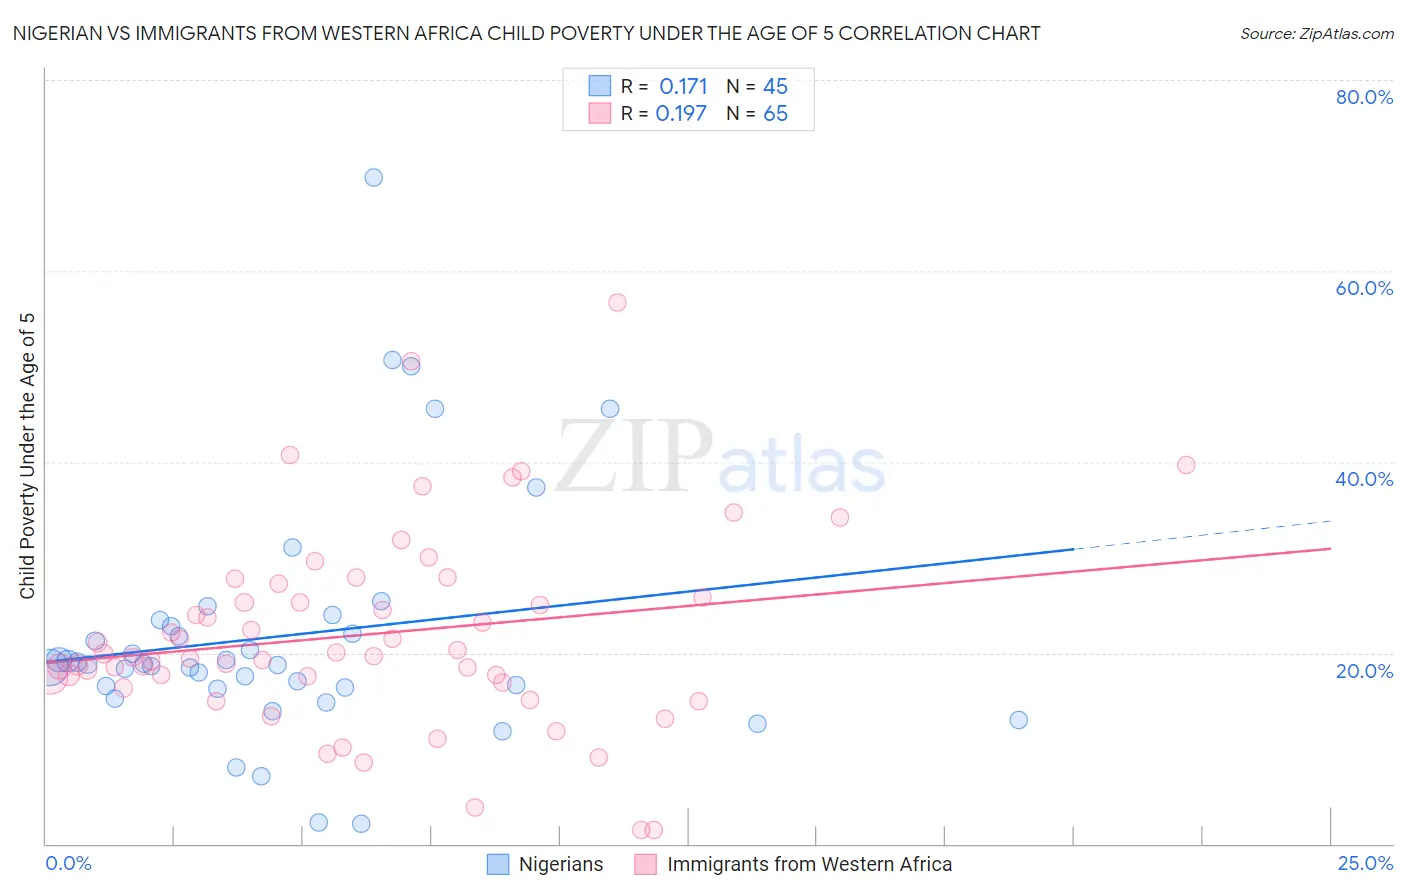 Nigerian vs Immigrants from Western Africa Child Poverty Under the Age of 5